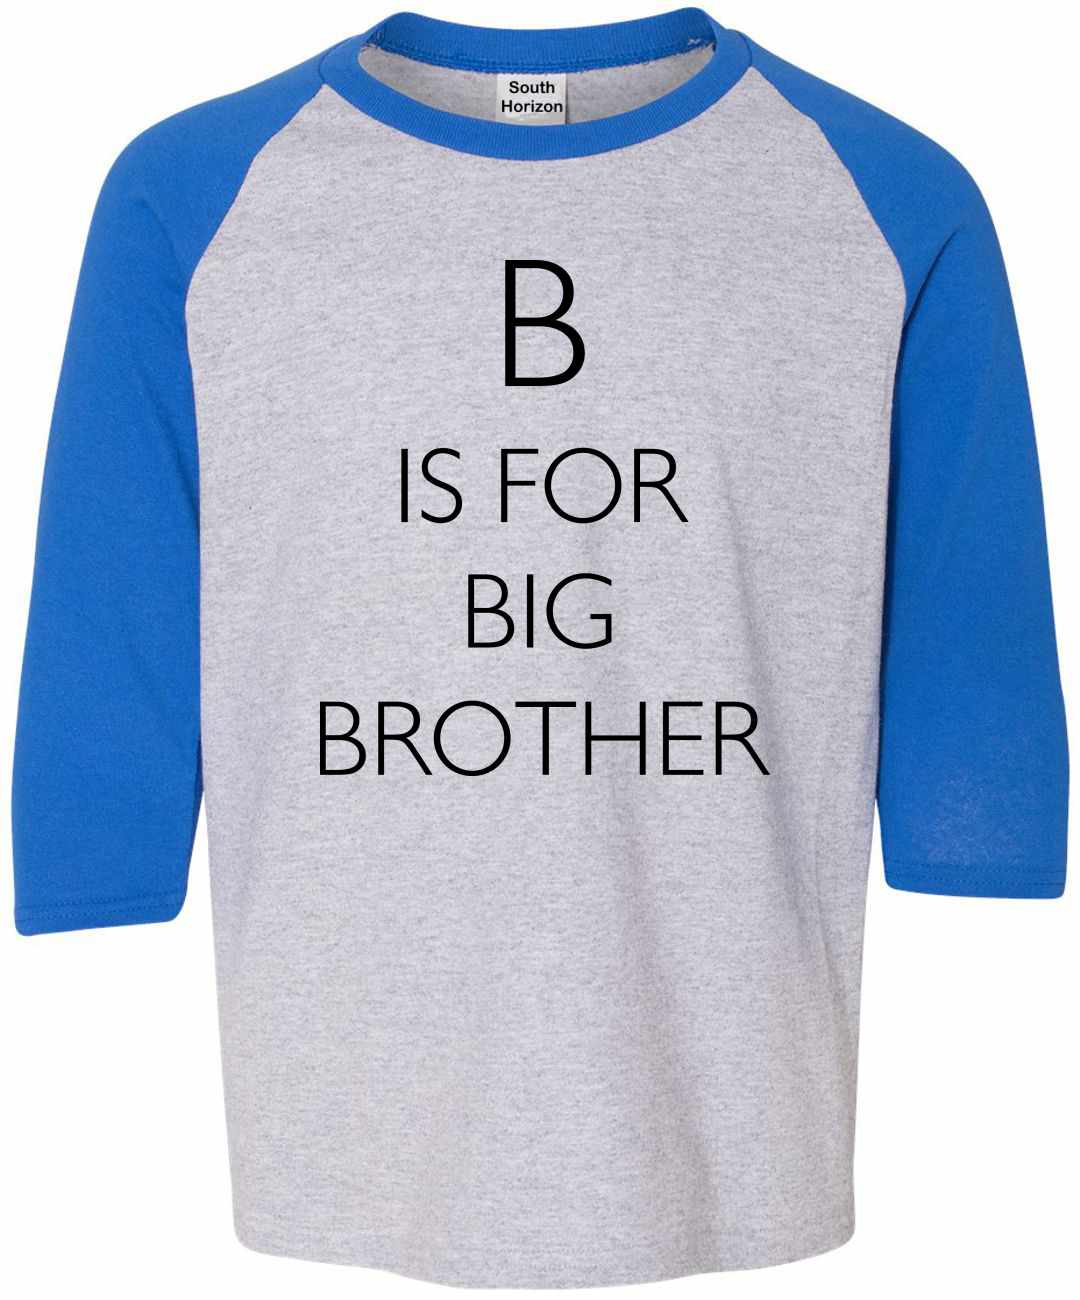 B is for Big Brother Youth Baseball